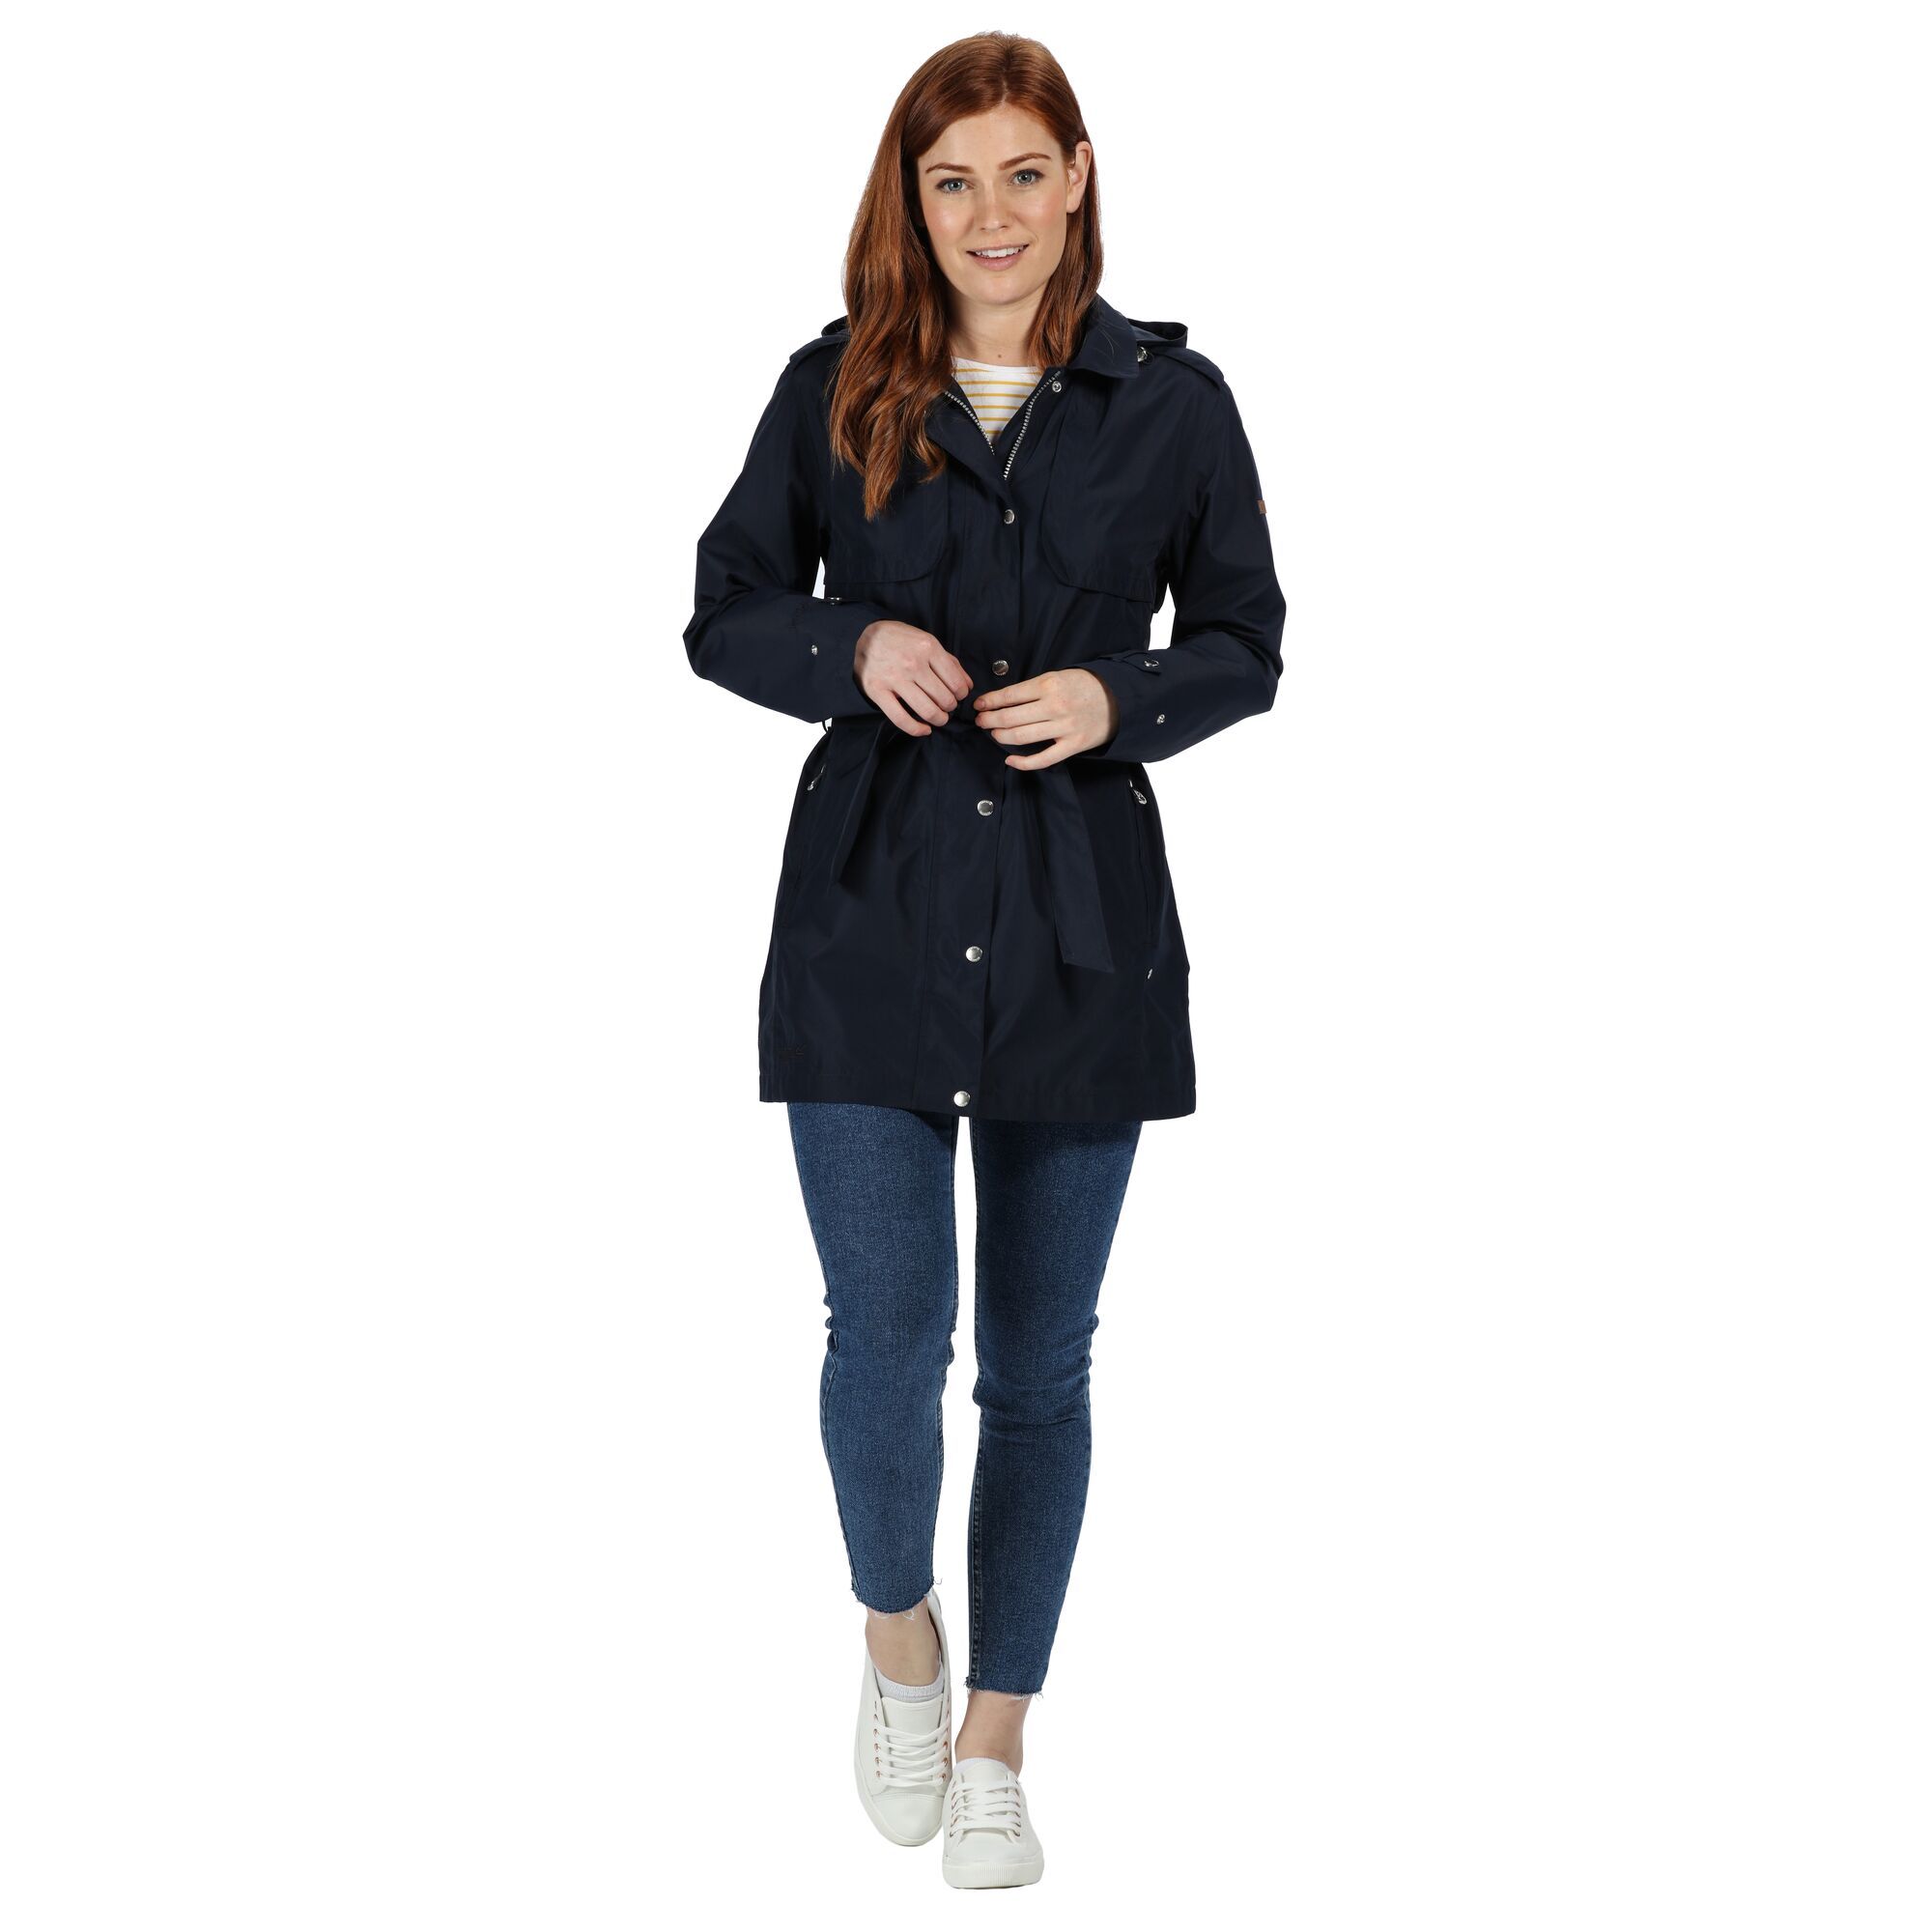 Material: 100% polyester. Breathability rating 5,000g/m2/24hrs. Durable water repellent finish. Taped seams. Polyester taffeta lining. Cotton chambray with polka dot print trim. Internal security pocket. Zip off hood with adjusters and turn down collar. Tie belt at waist. 2 zipped lower pockets.